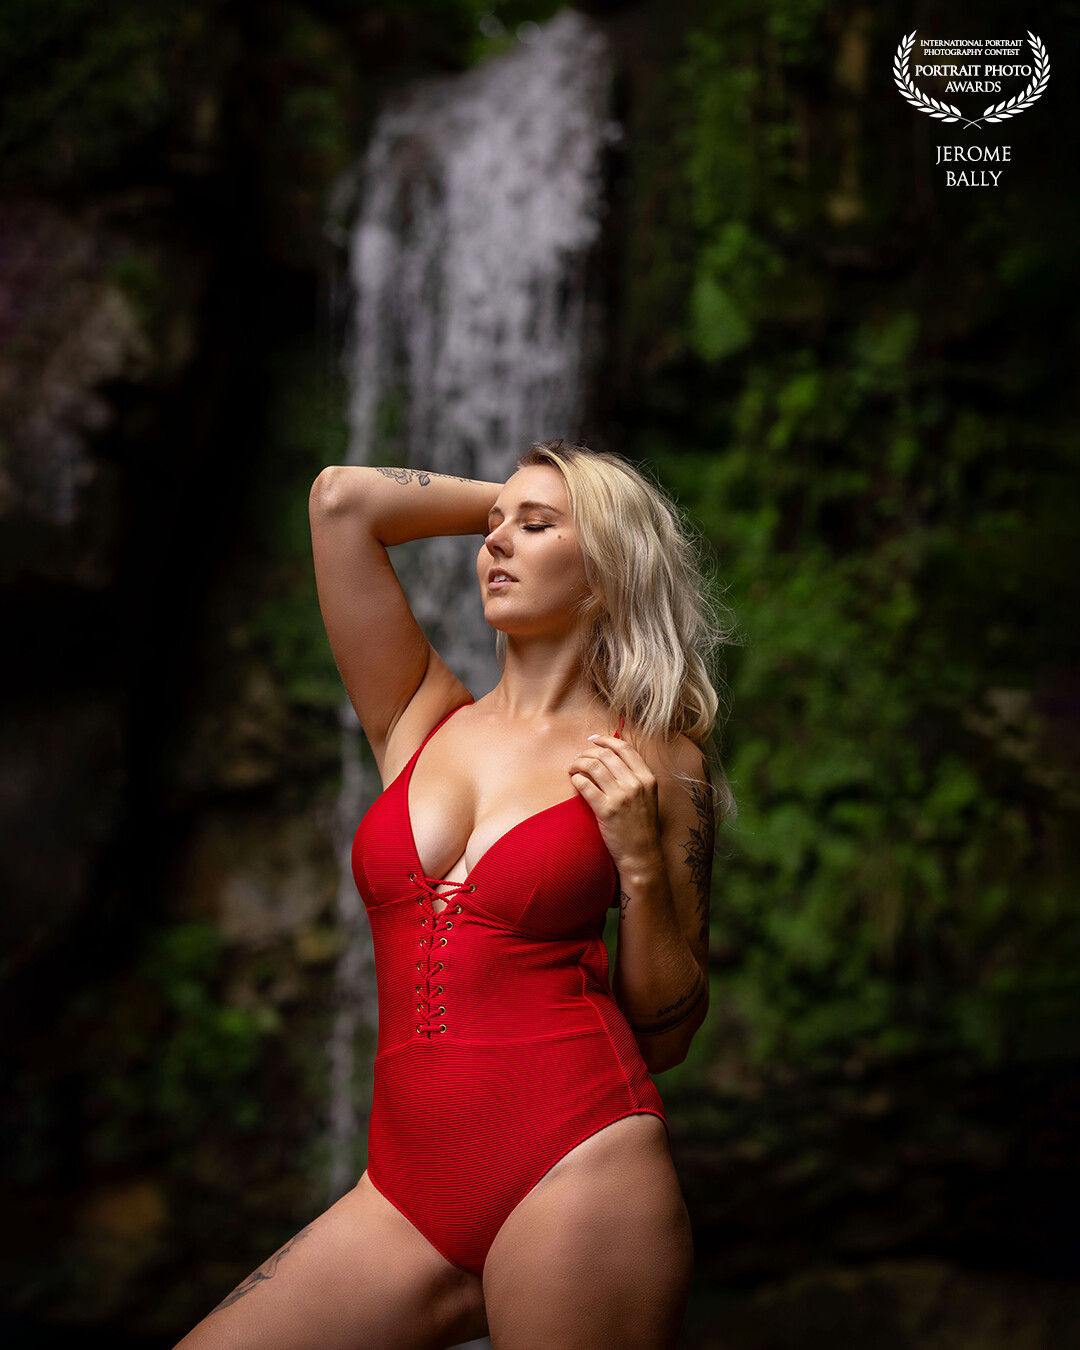 Alicia @_aliciavoile_ and myself decided to do a first shooting close to a nice waterfall. Even in the colder Swiss environment we wanted to create a feeling of warm and relaxing environment.